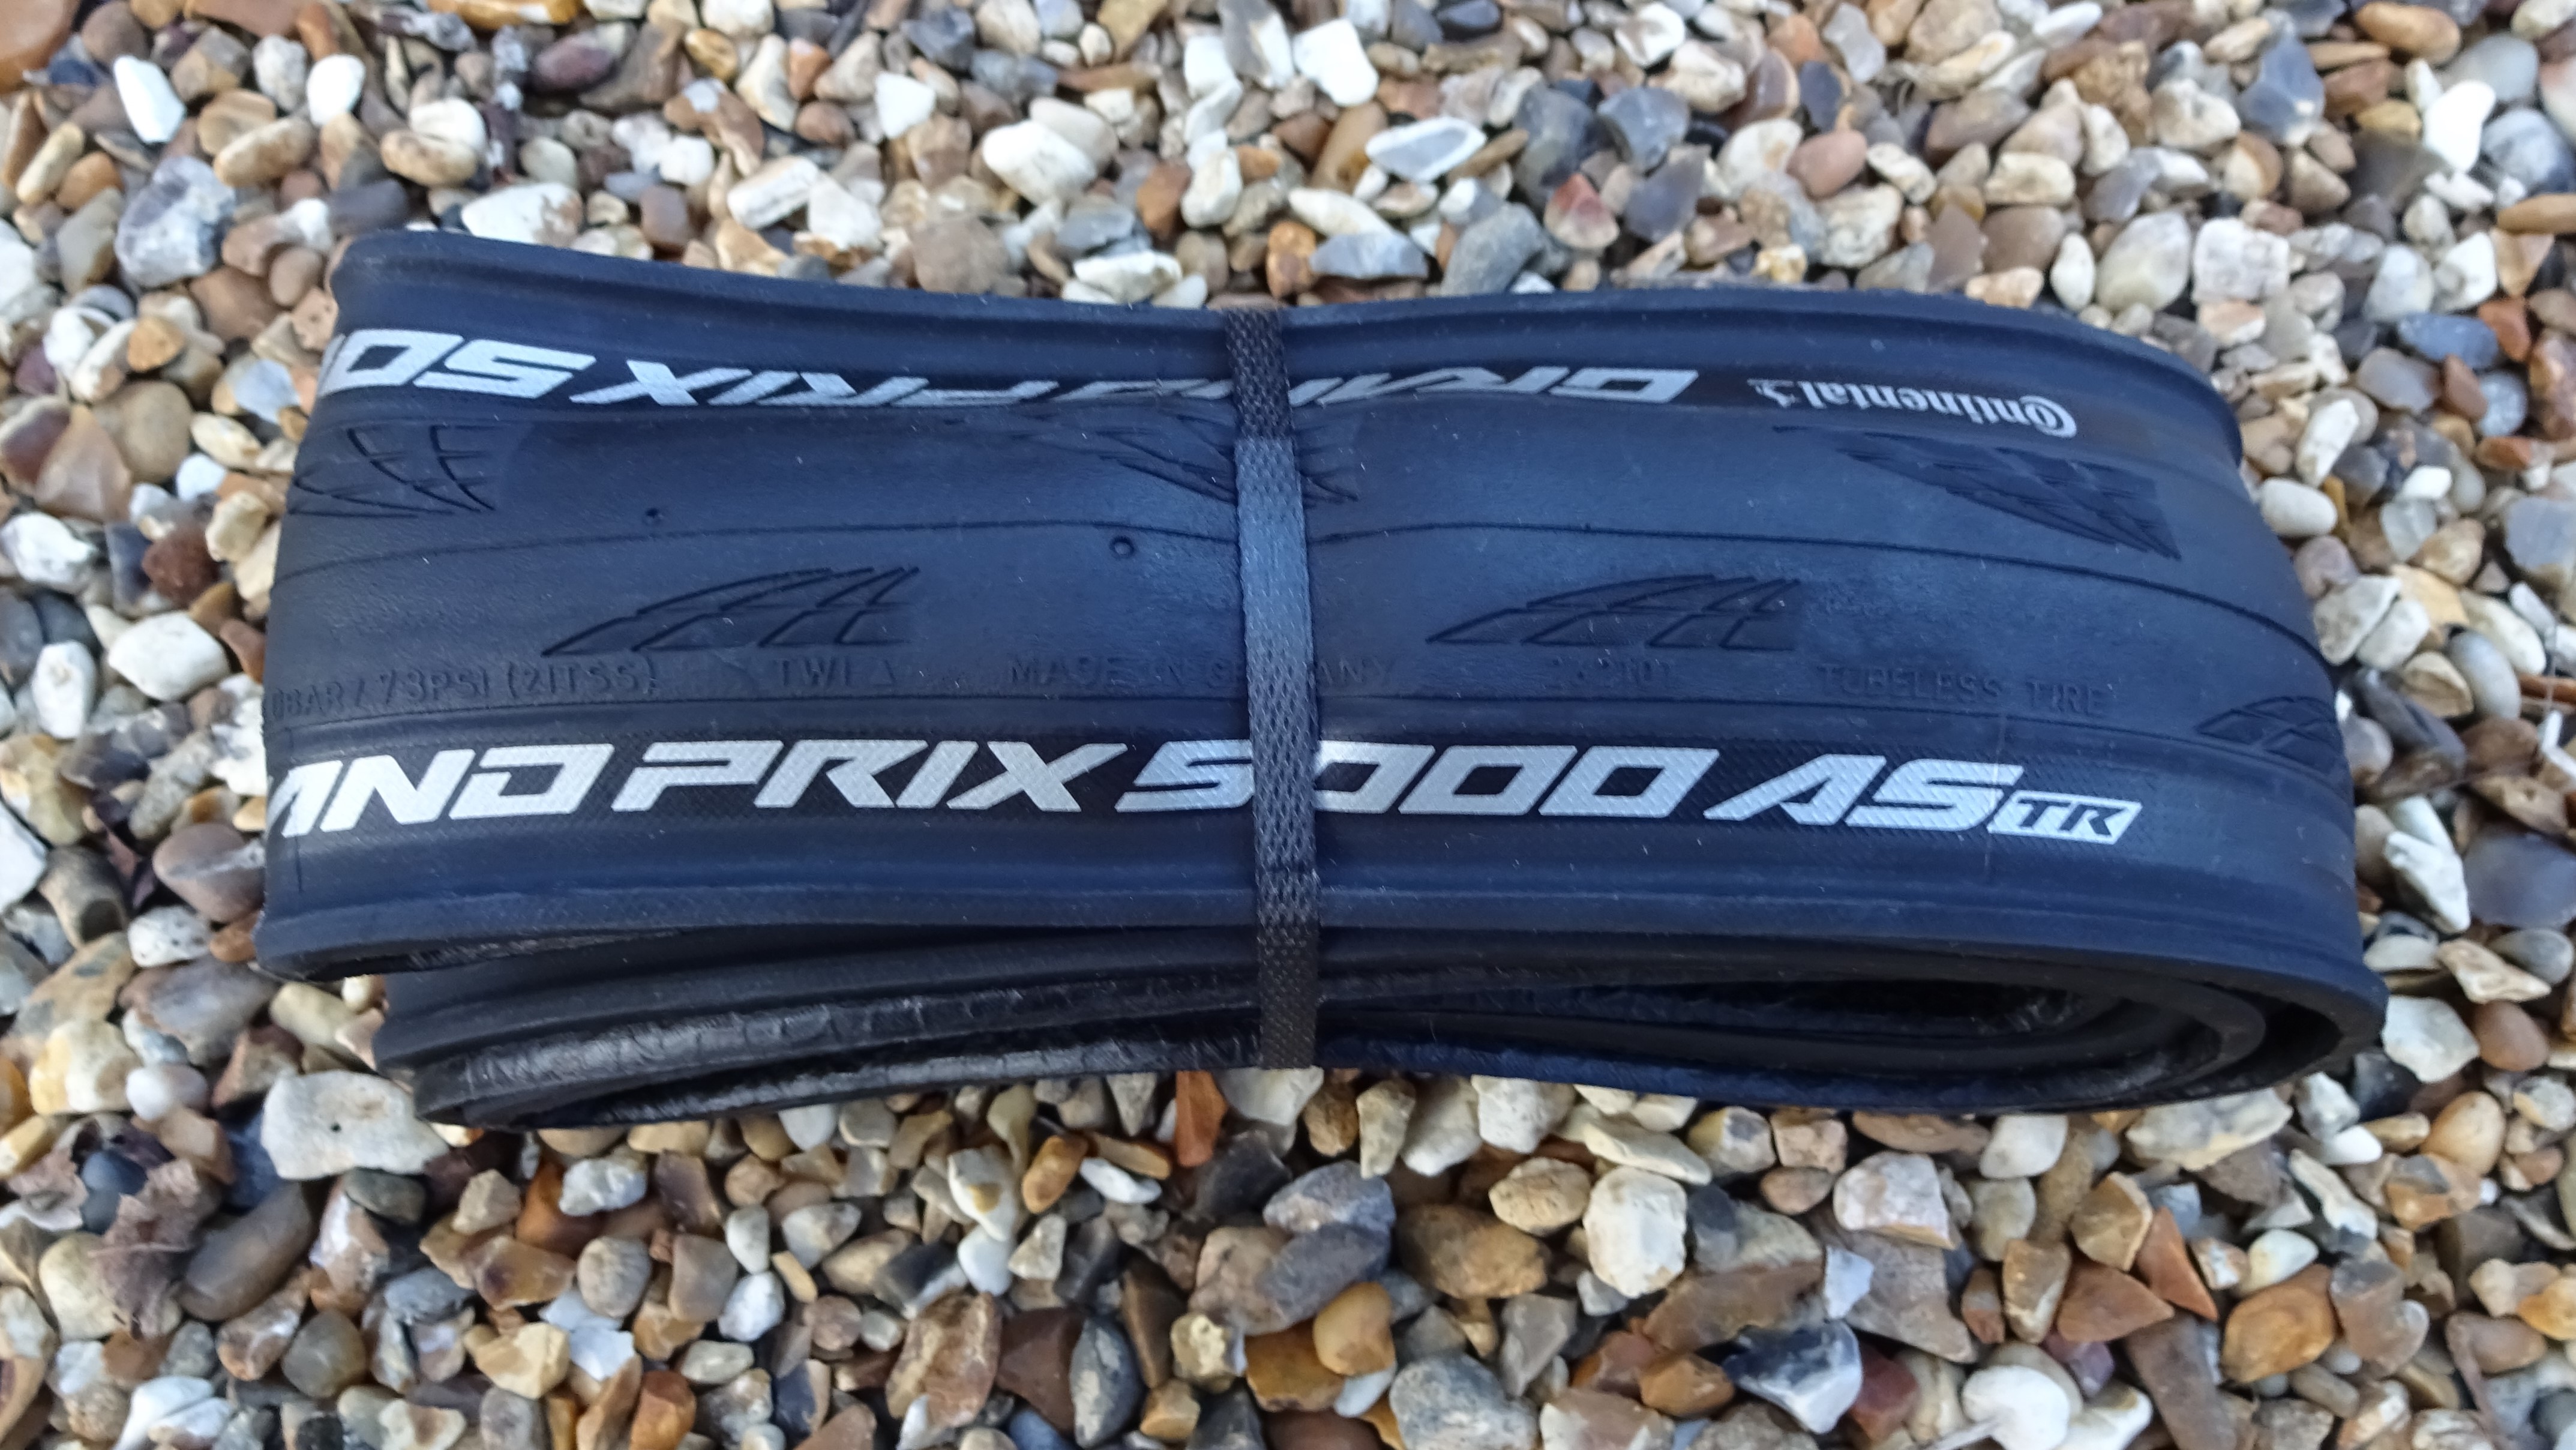 Continental adds two new Grand Prix 5000 TR tubeless-ready tire